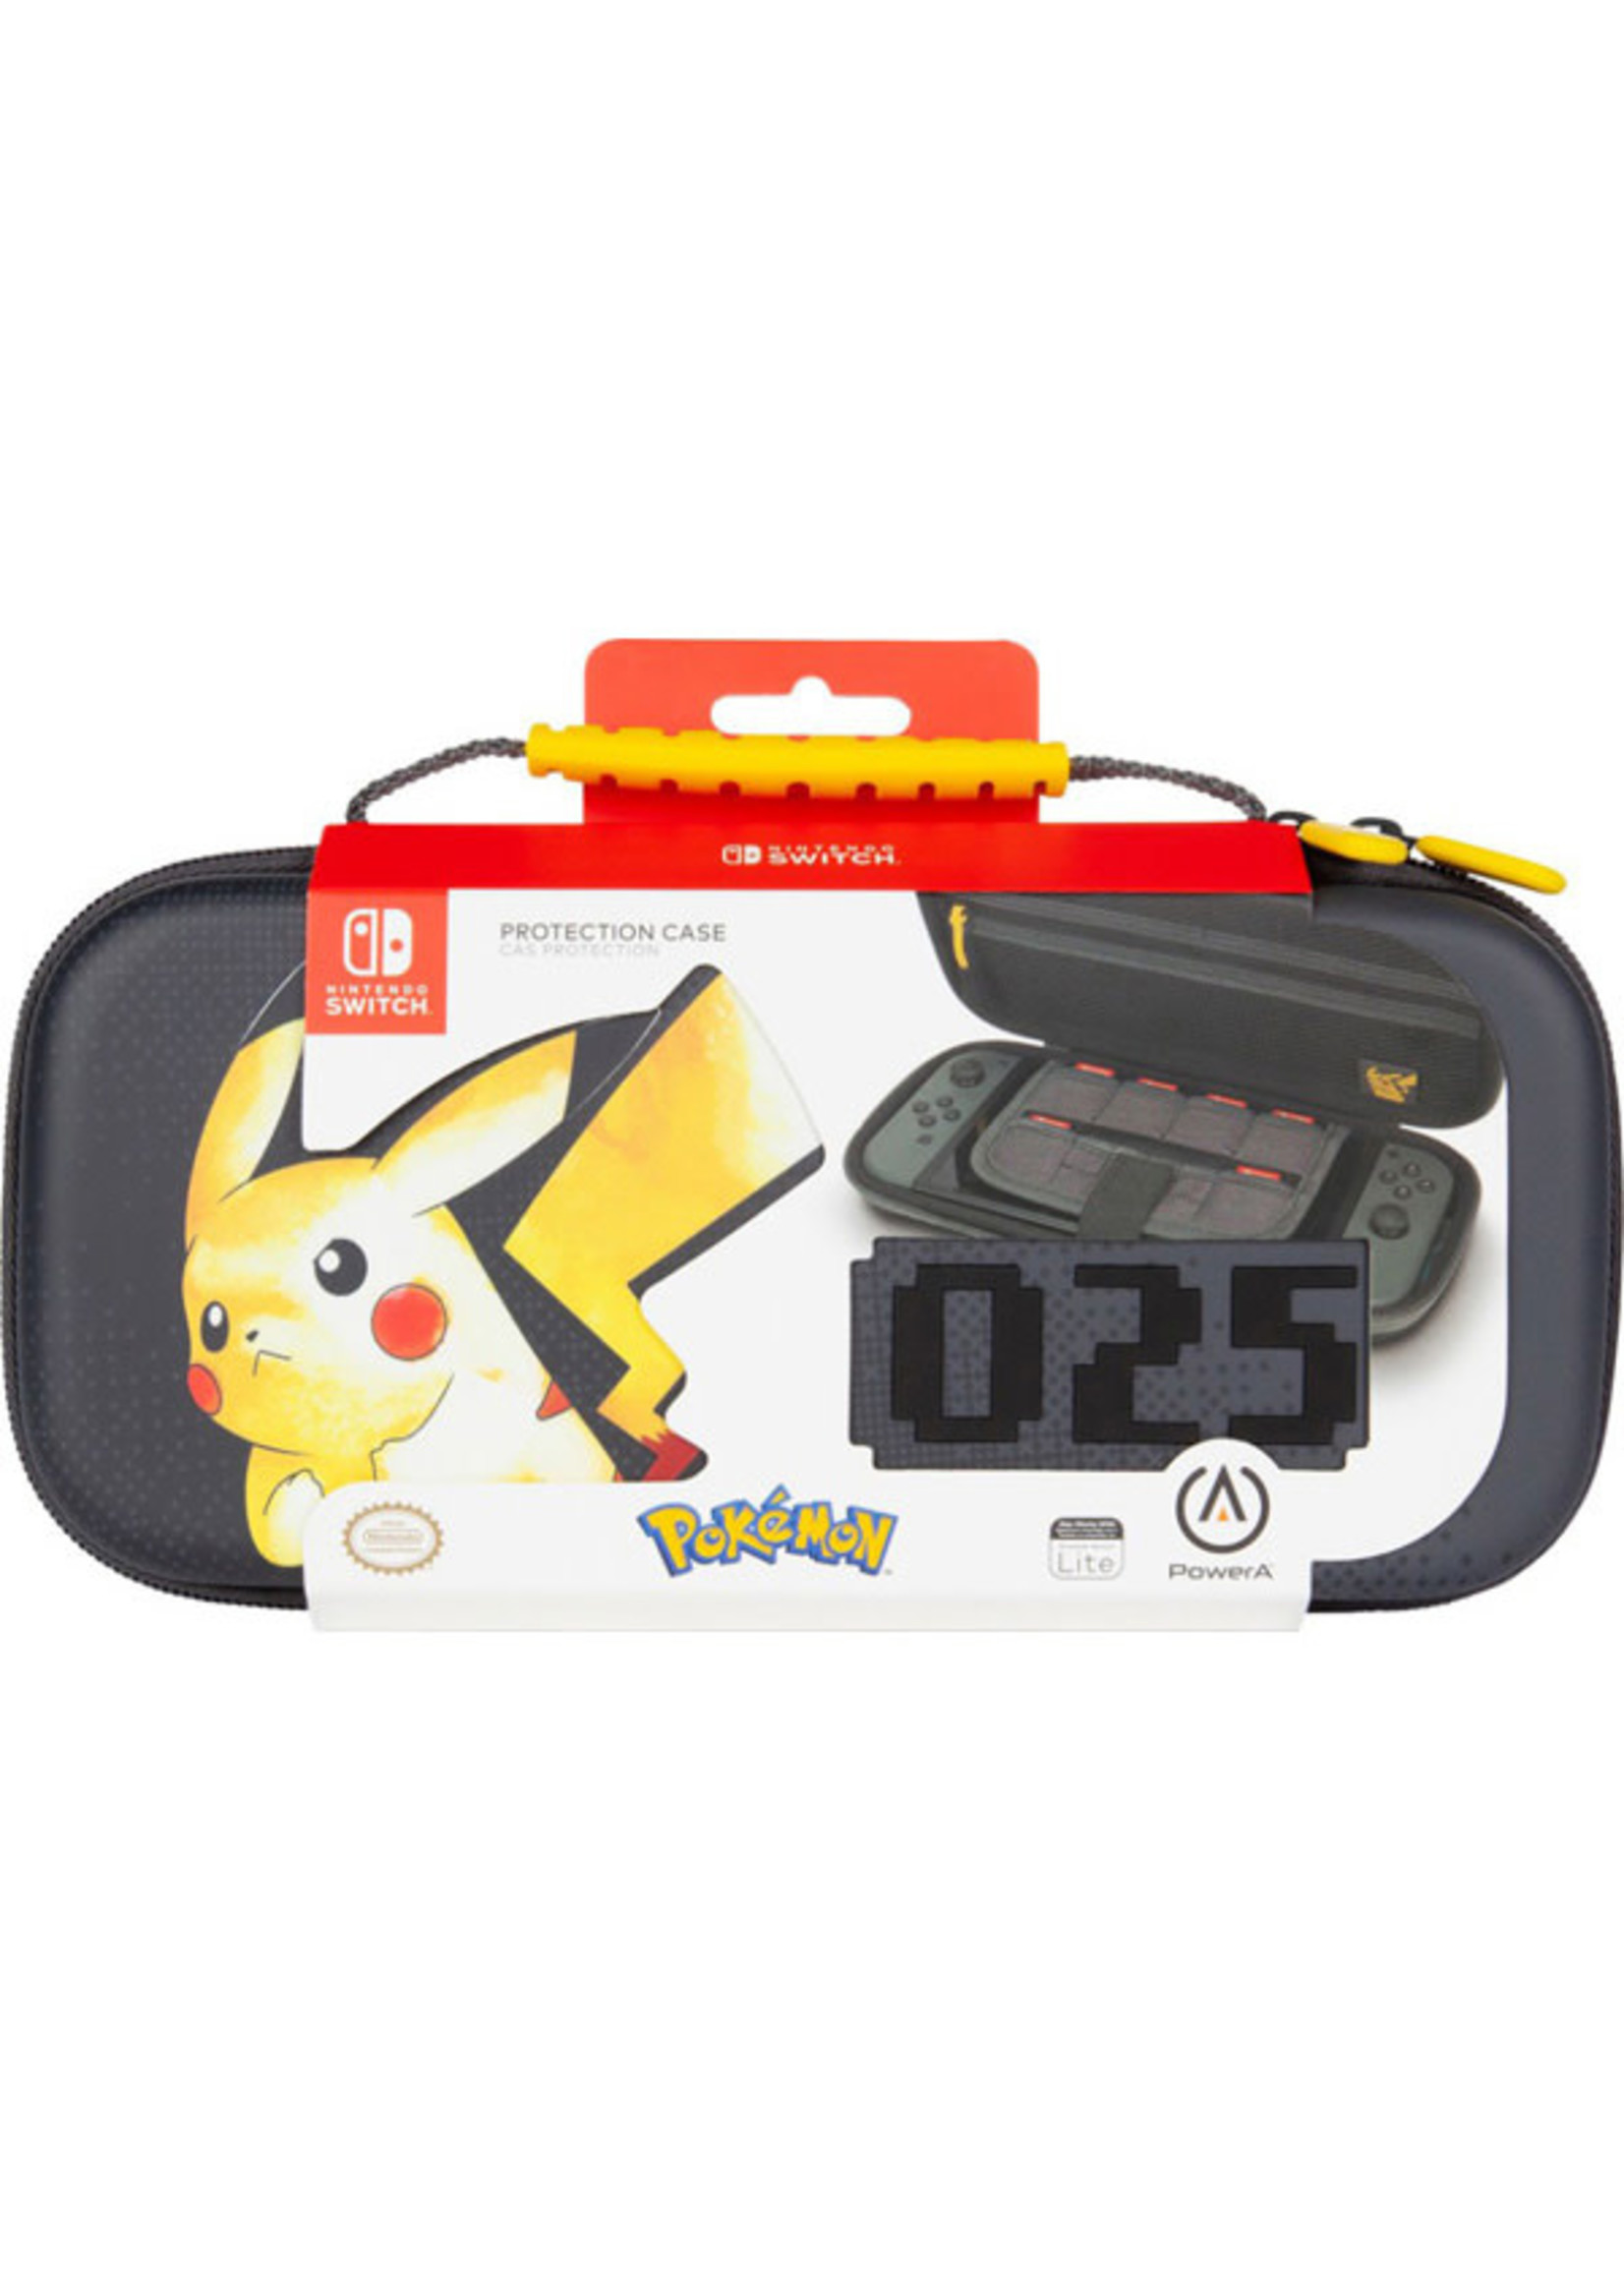 NINTENDO SWITCH PROTECTION CASE PIKACHU 25TH ANNIVERSARY